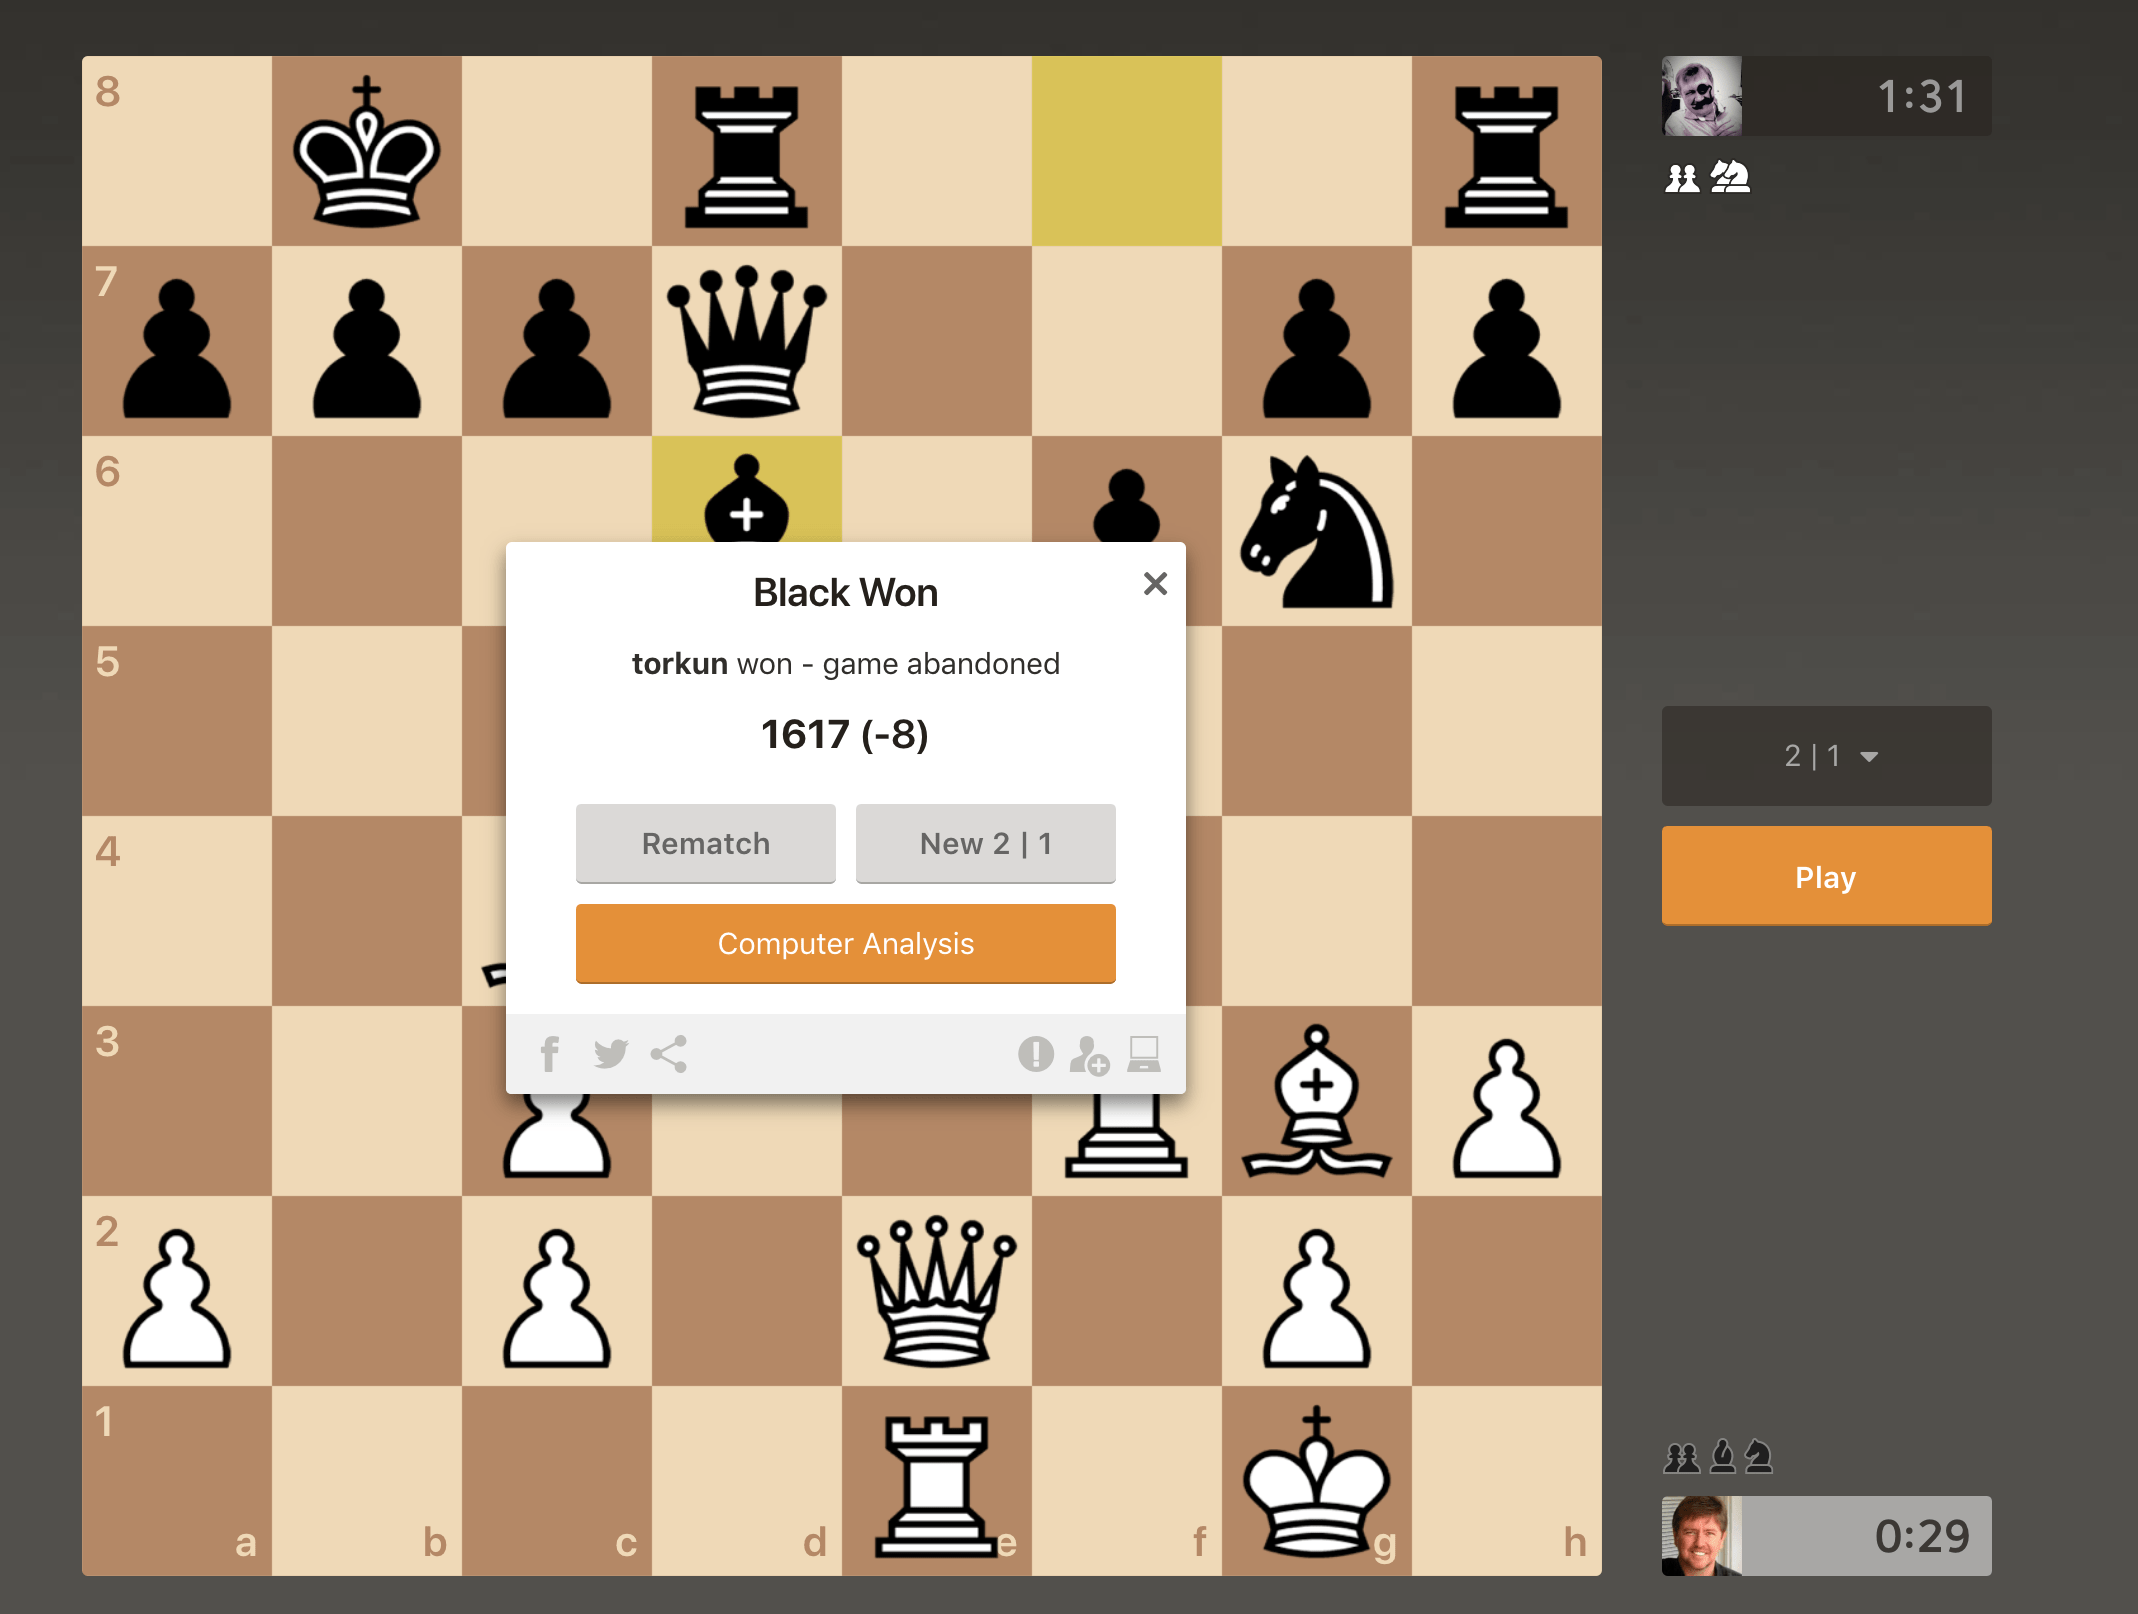 this was a 3+0 game and when my opponent was completely lost he